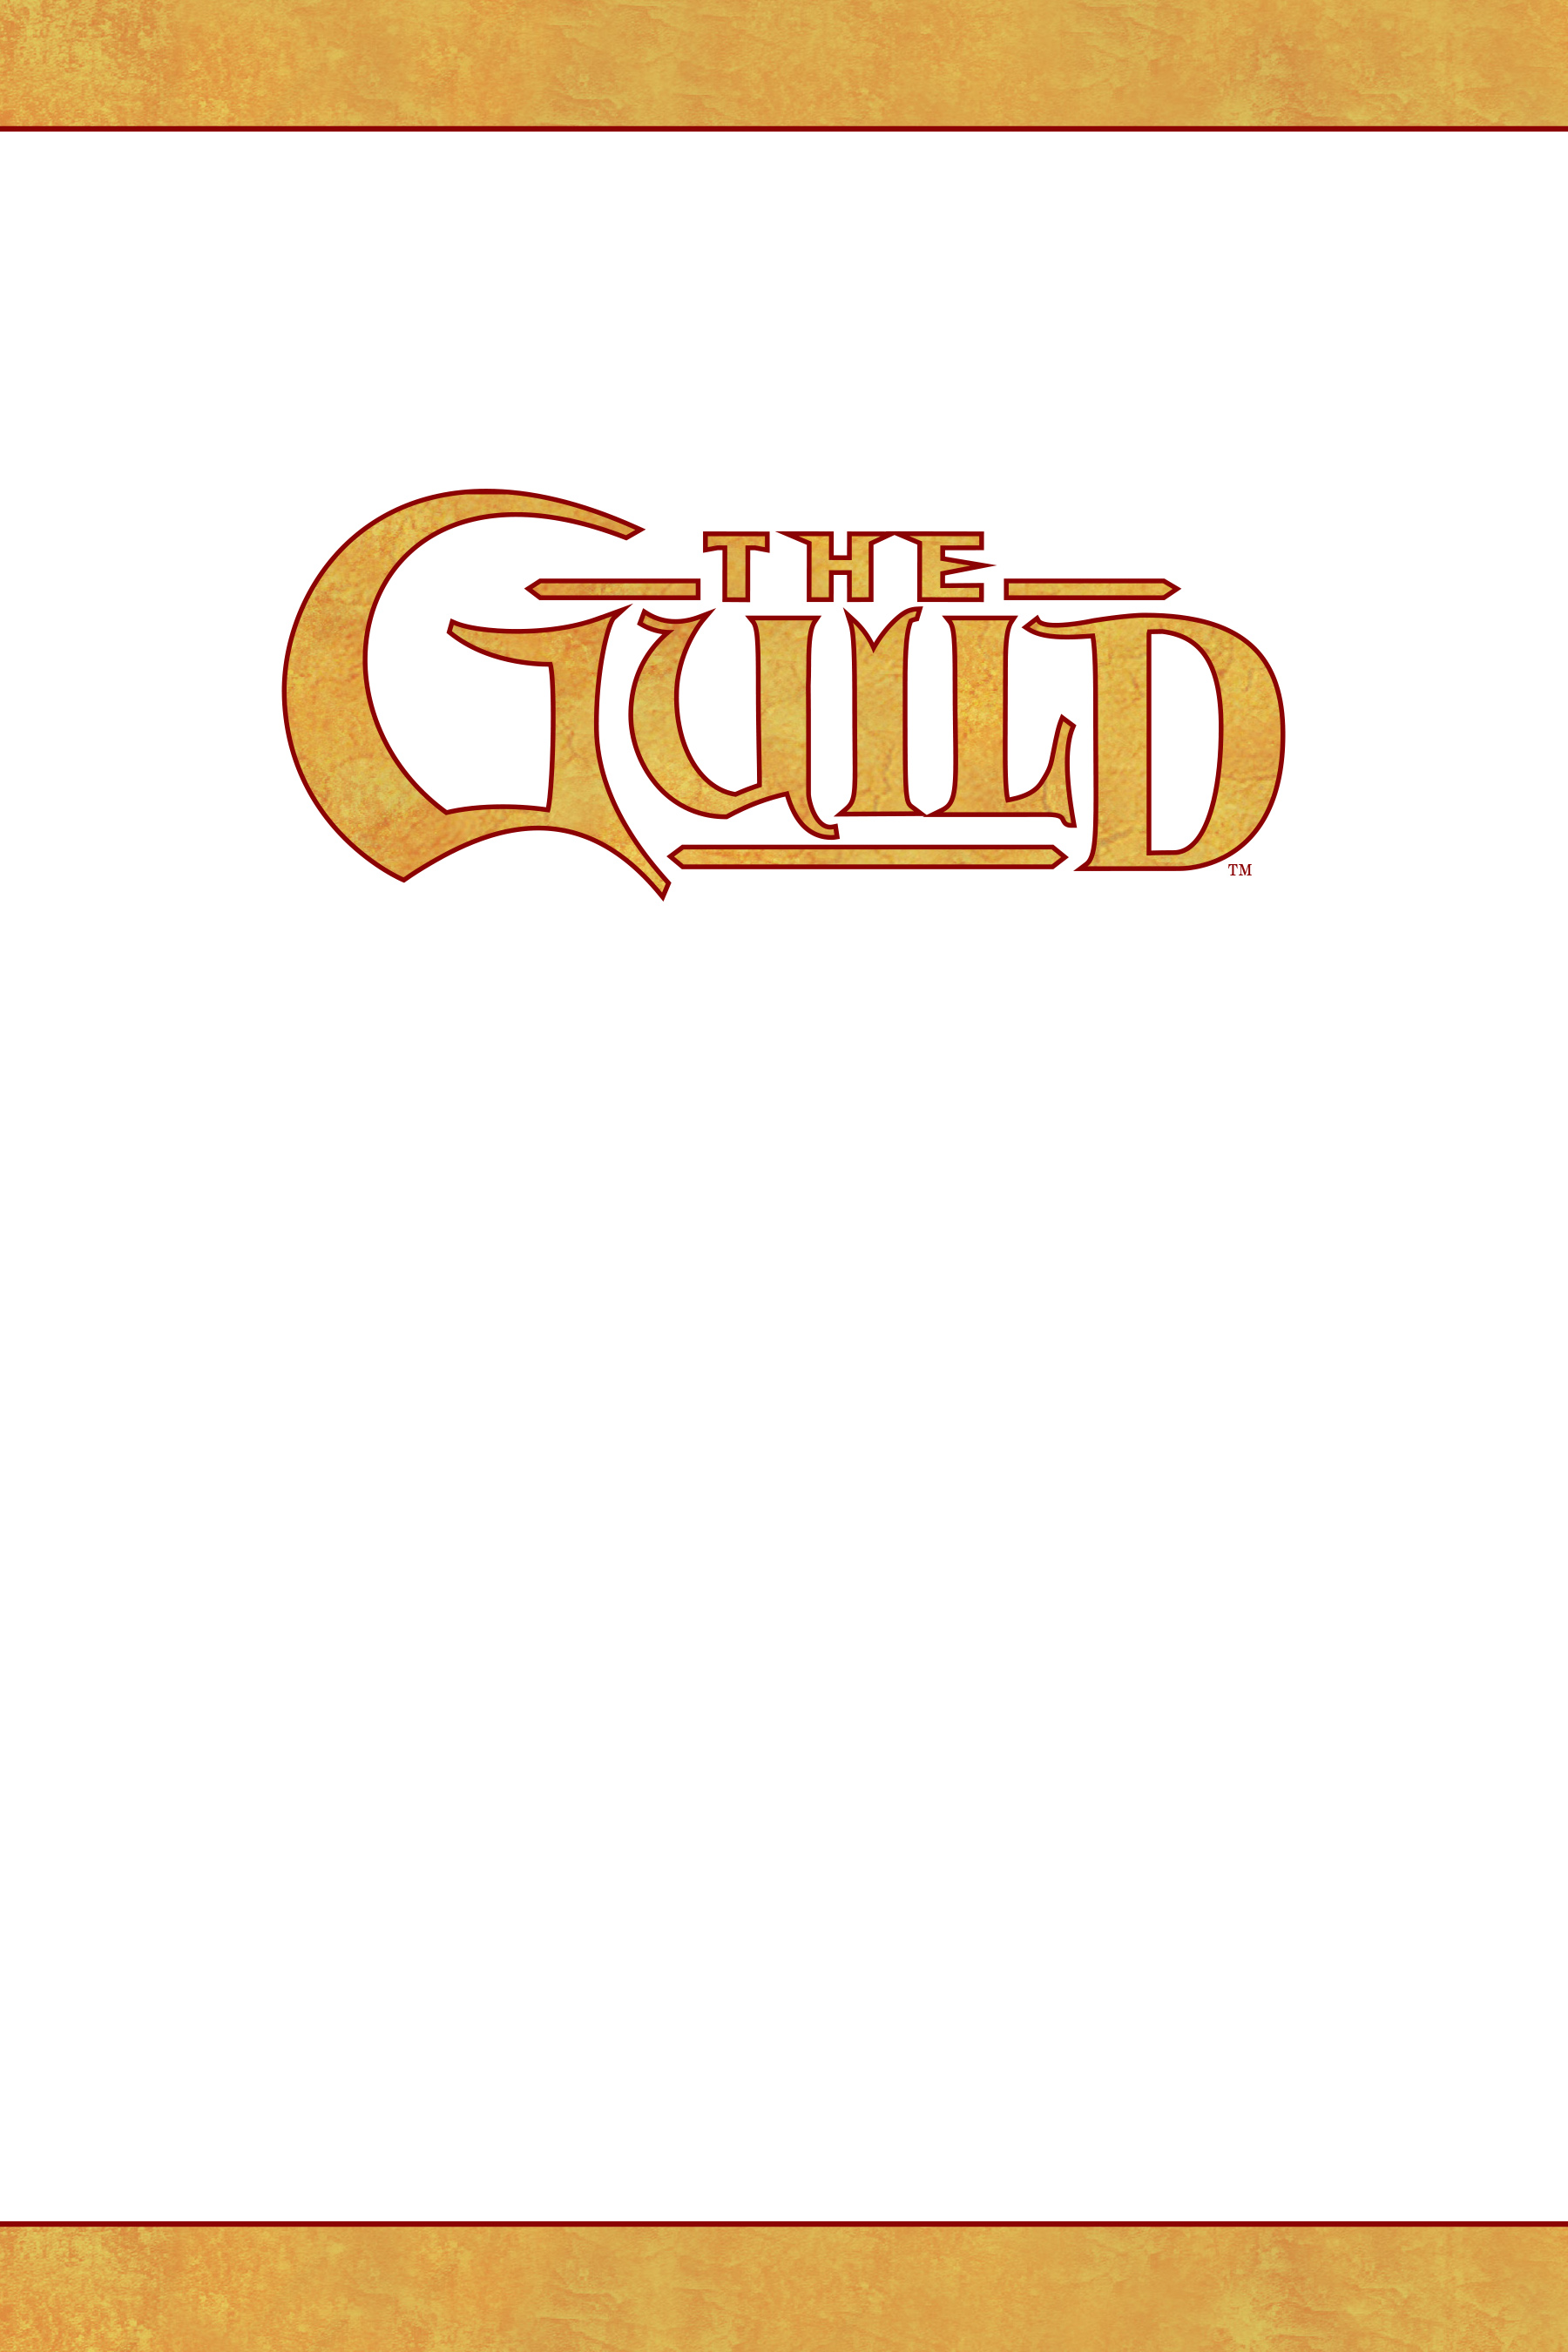 Read online The Guild comic -  Issue # TPB - 3